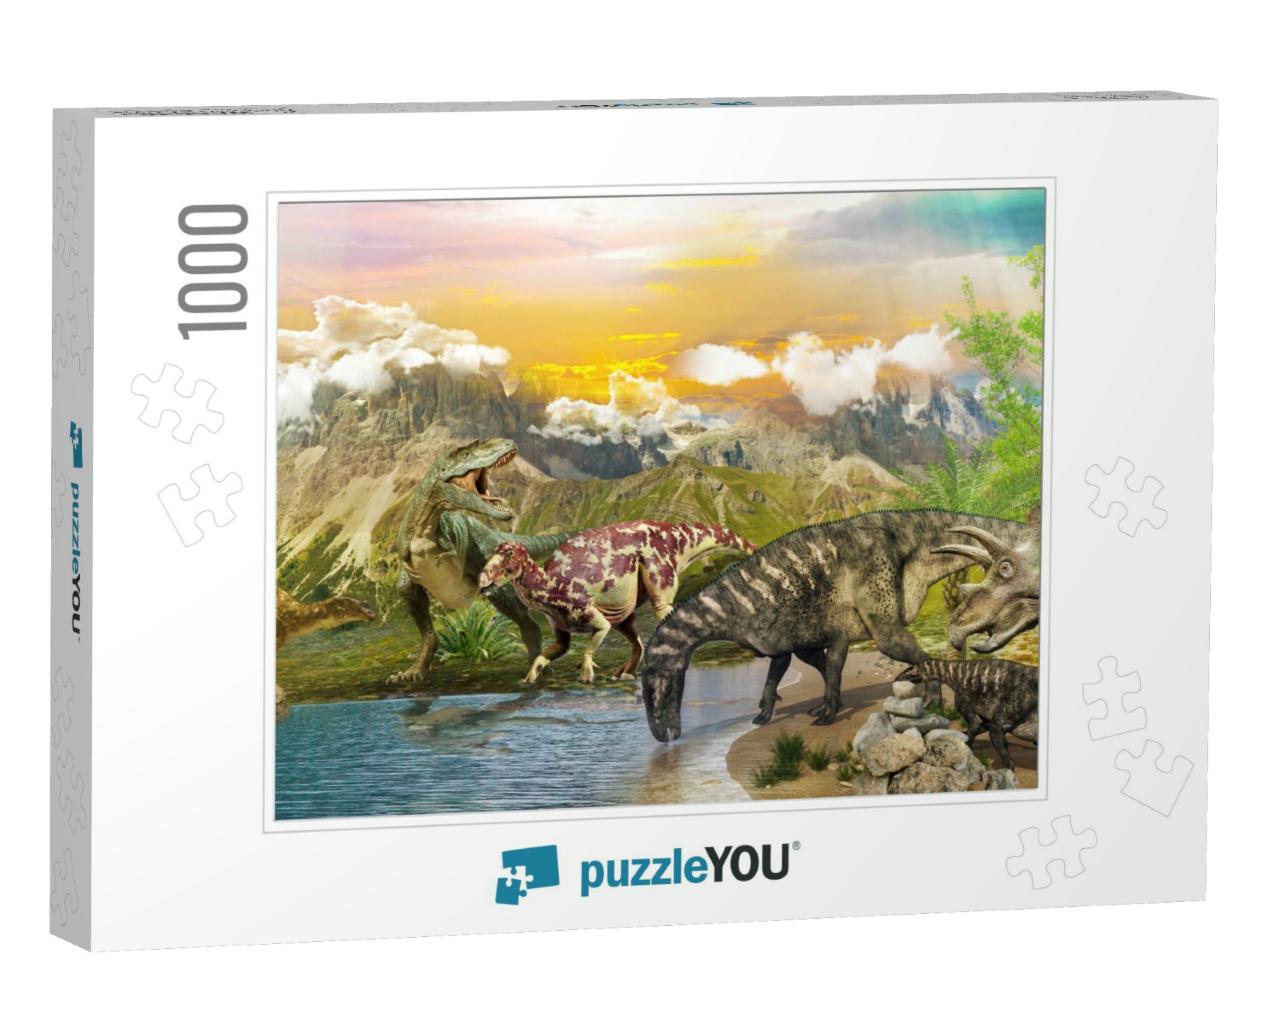 Dinosaurs in the Park by the Lake. 3D Image... Jigsaw Puzzle with 1000 pieces